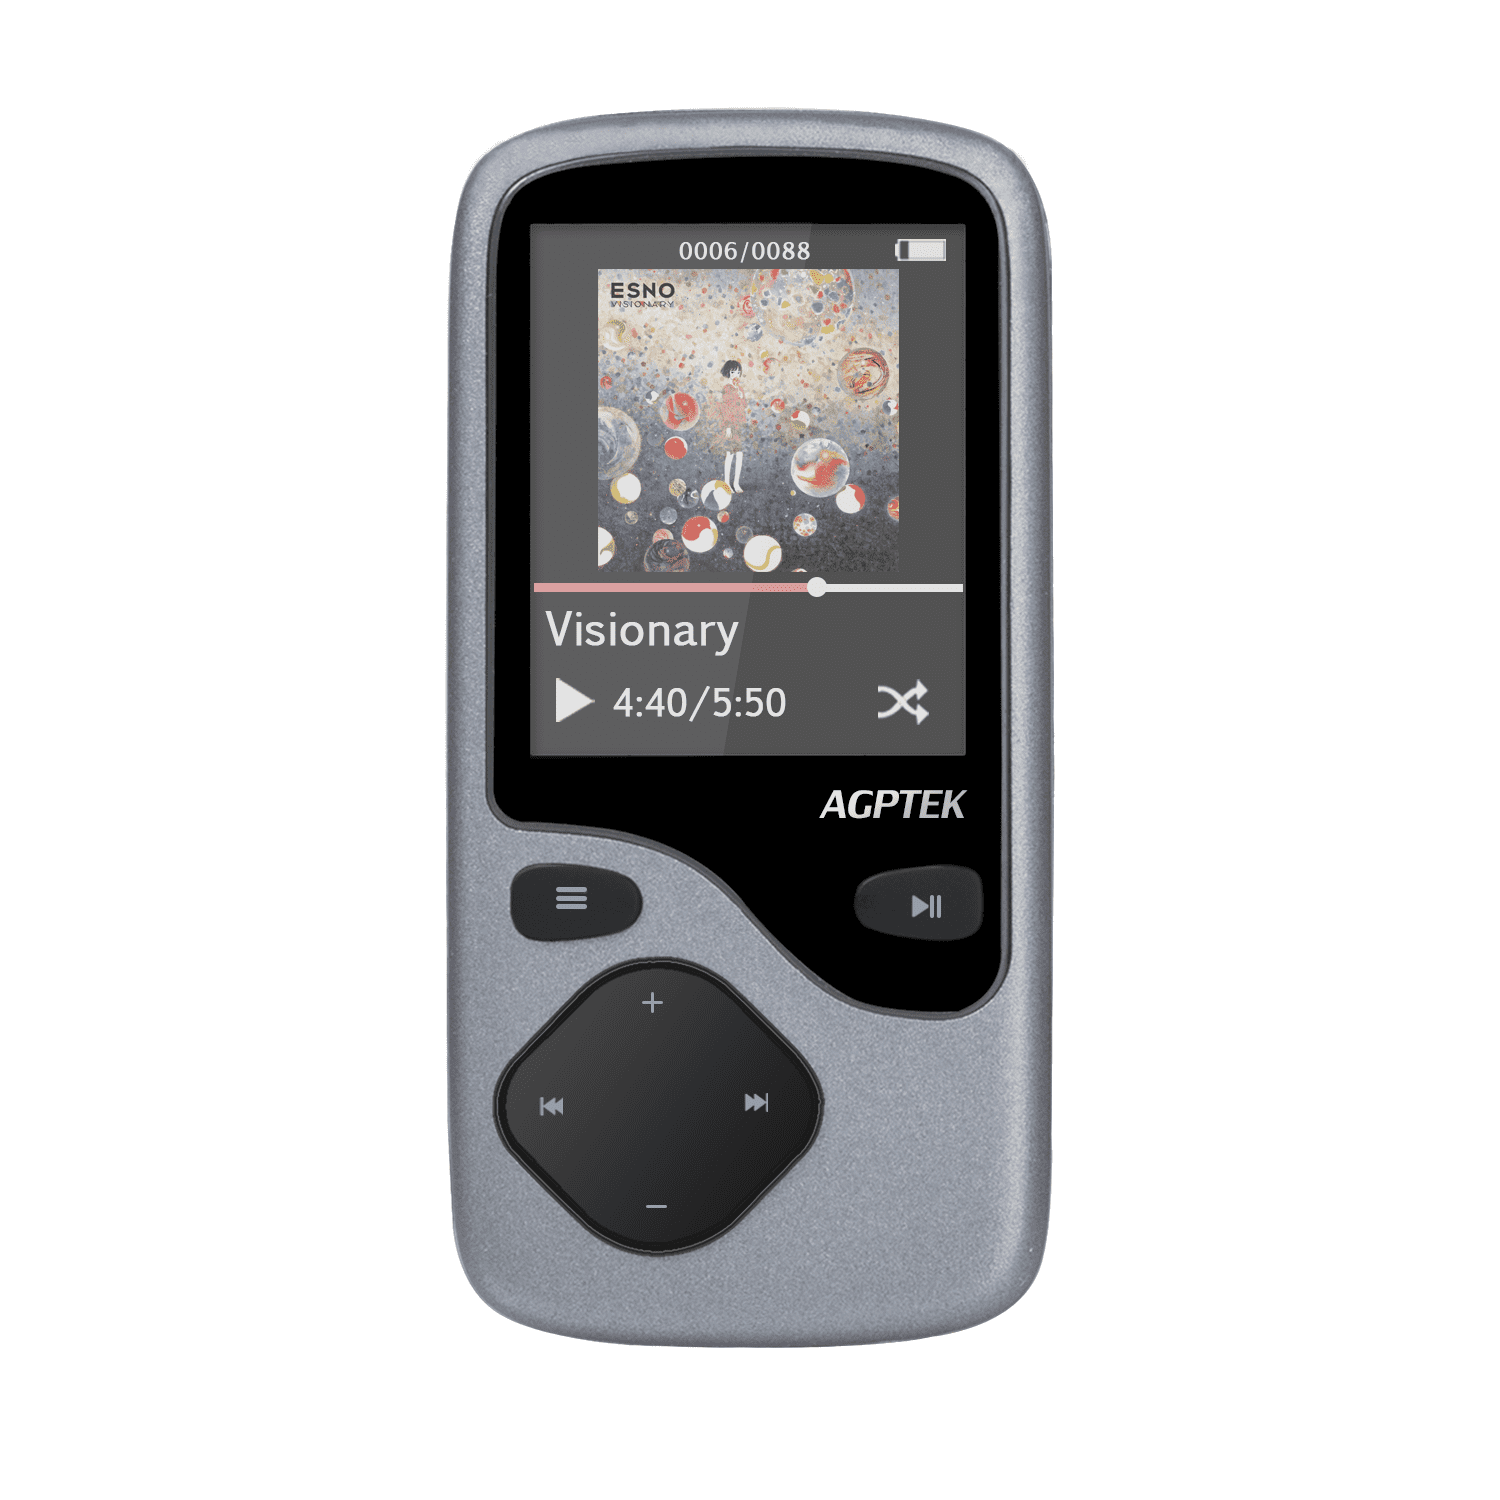 AGPTEK C05 8GB Bluetooth MP3 Player with FM Radio, 12 Hours Lossless ...